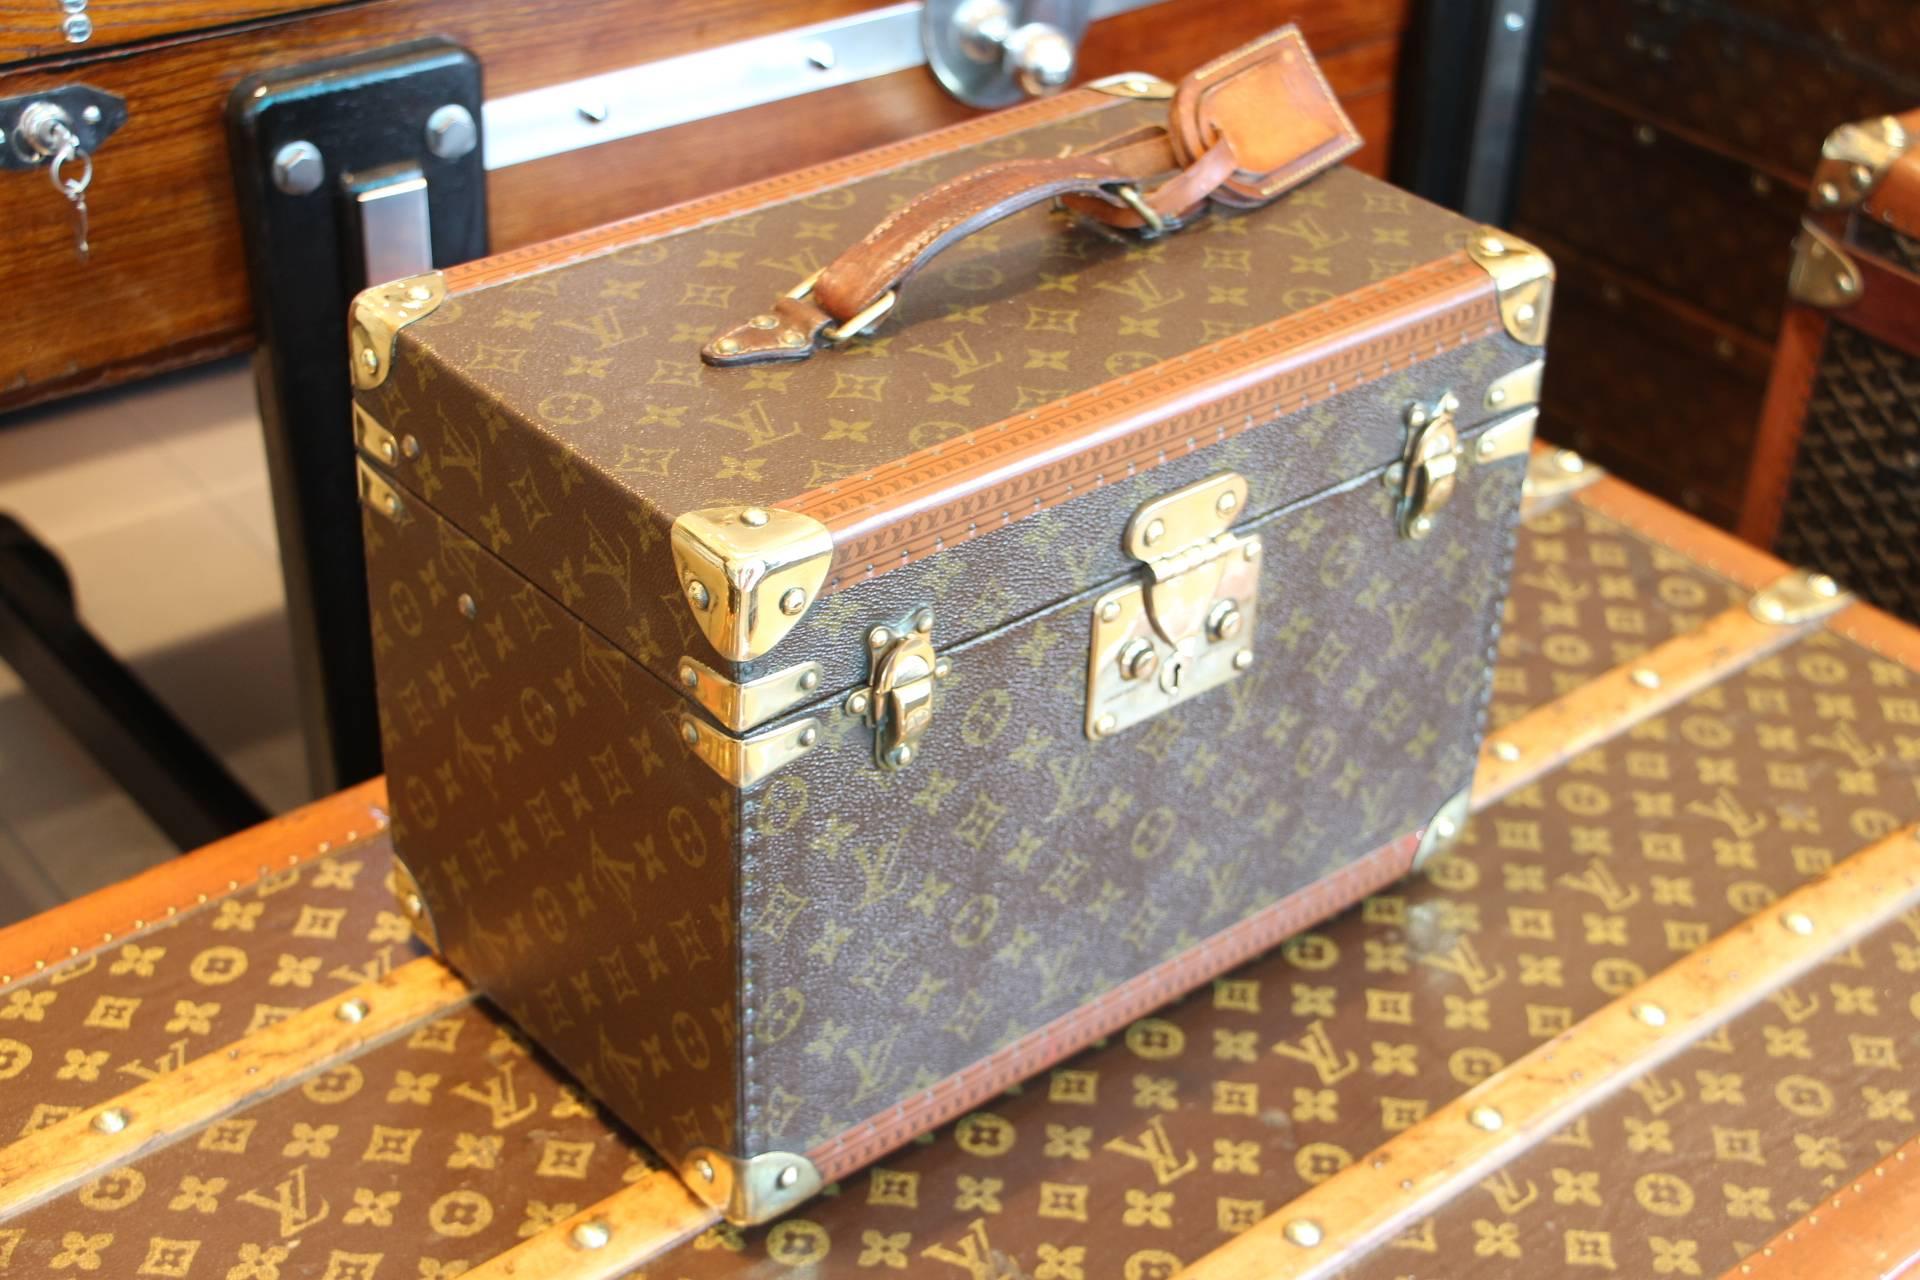 This beauty case features monogram canvas and all brass fittings.
All studs are marked as well as its leather handle.
Interior: Beige coated canvas, adjustable leather straps for holding materials. Very clean and fresh.
Removable little box with